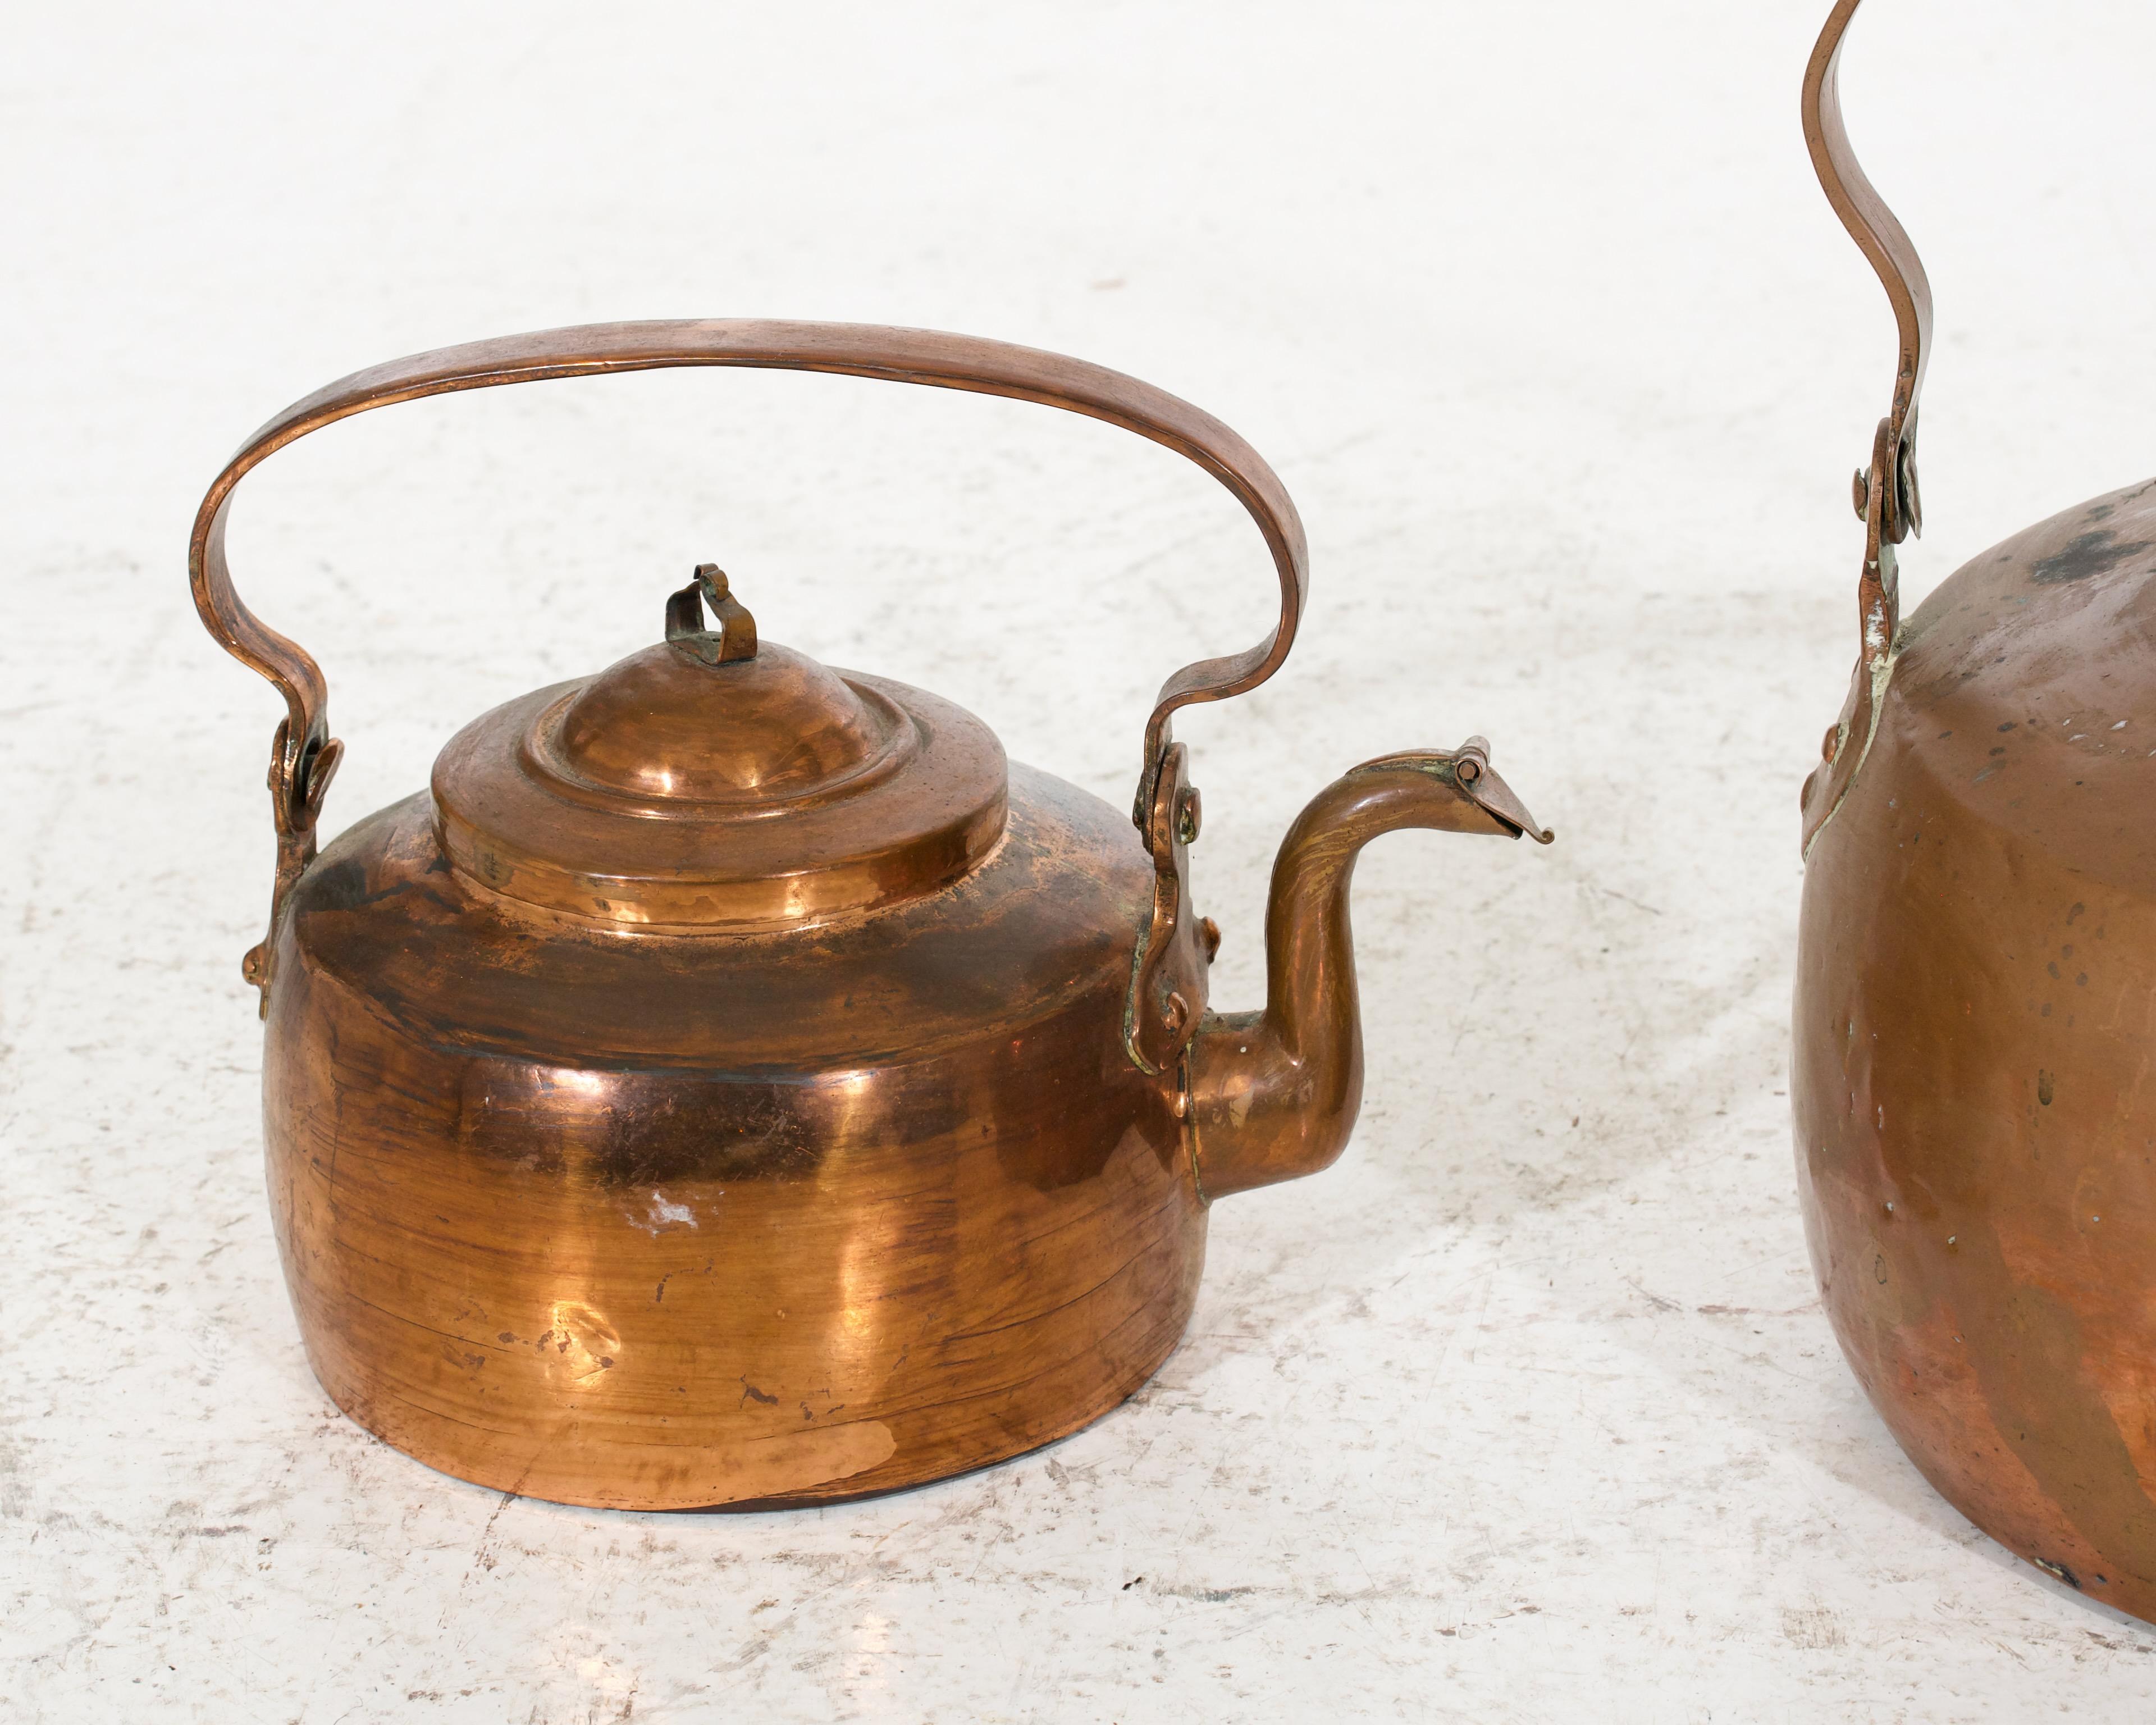 Copper handmade kettles from a Danish manor house and signed, circa 1750 - 1770.